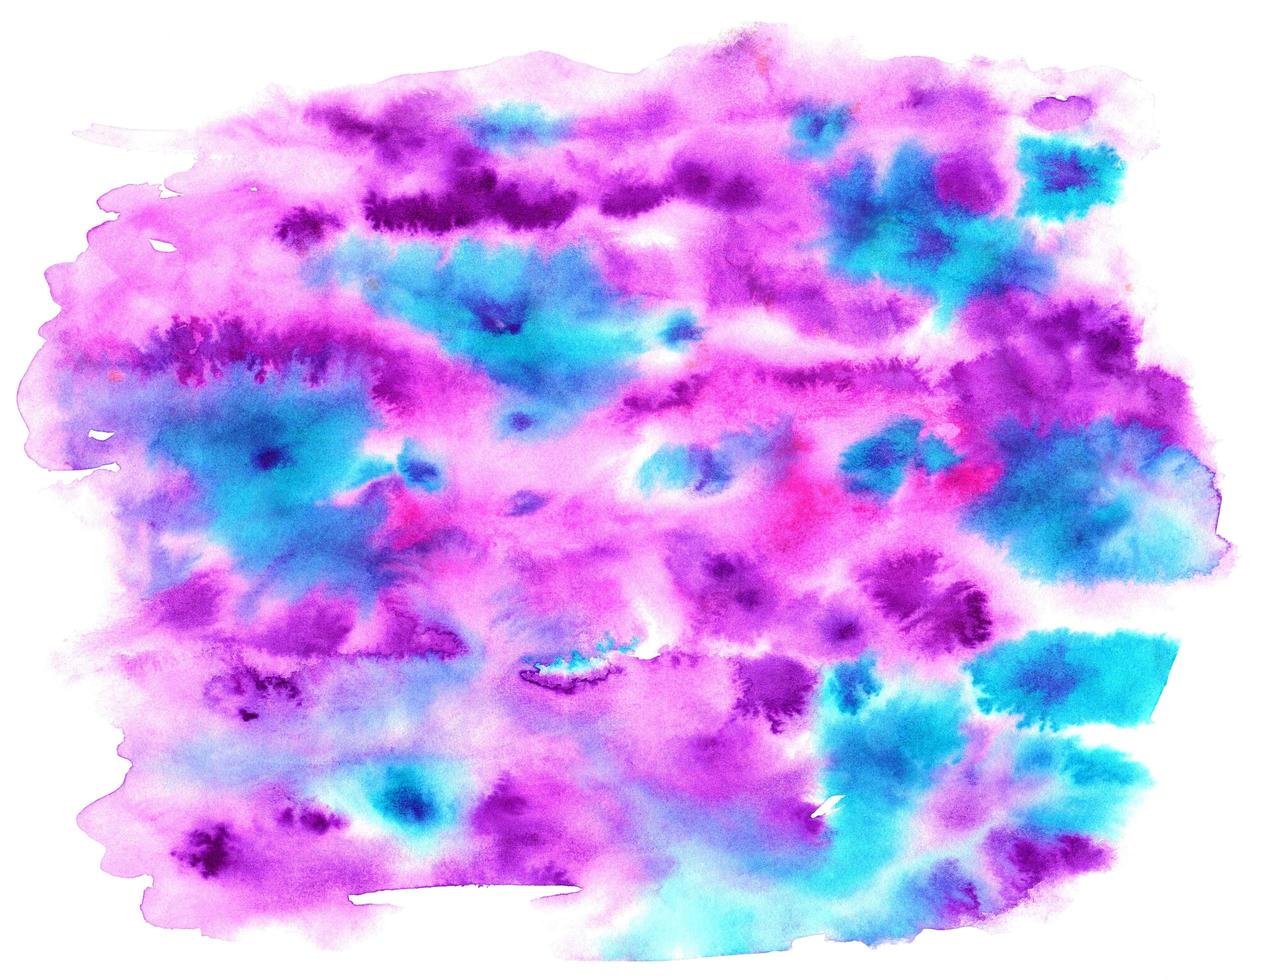 Abstract blurry watercolor background in violet turquoise tones. Hand drawn bright, colorful spotted illustration. photo